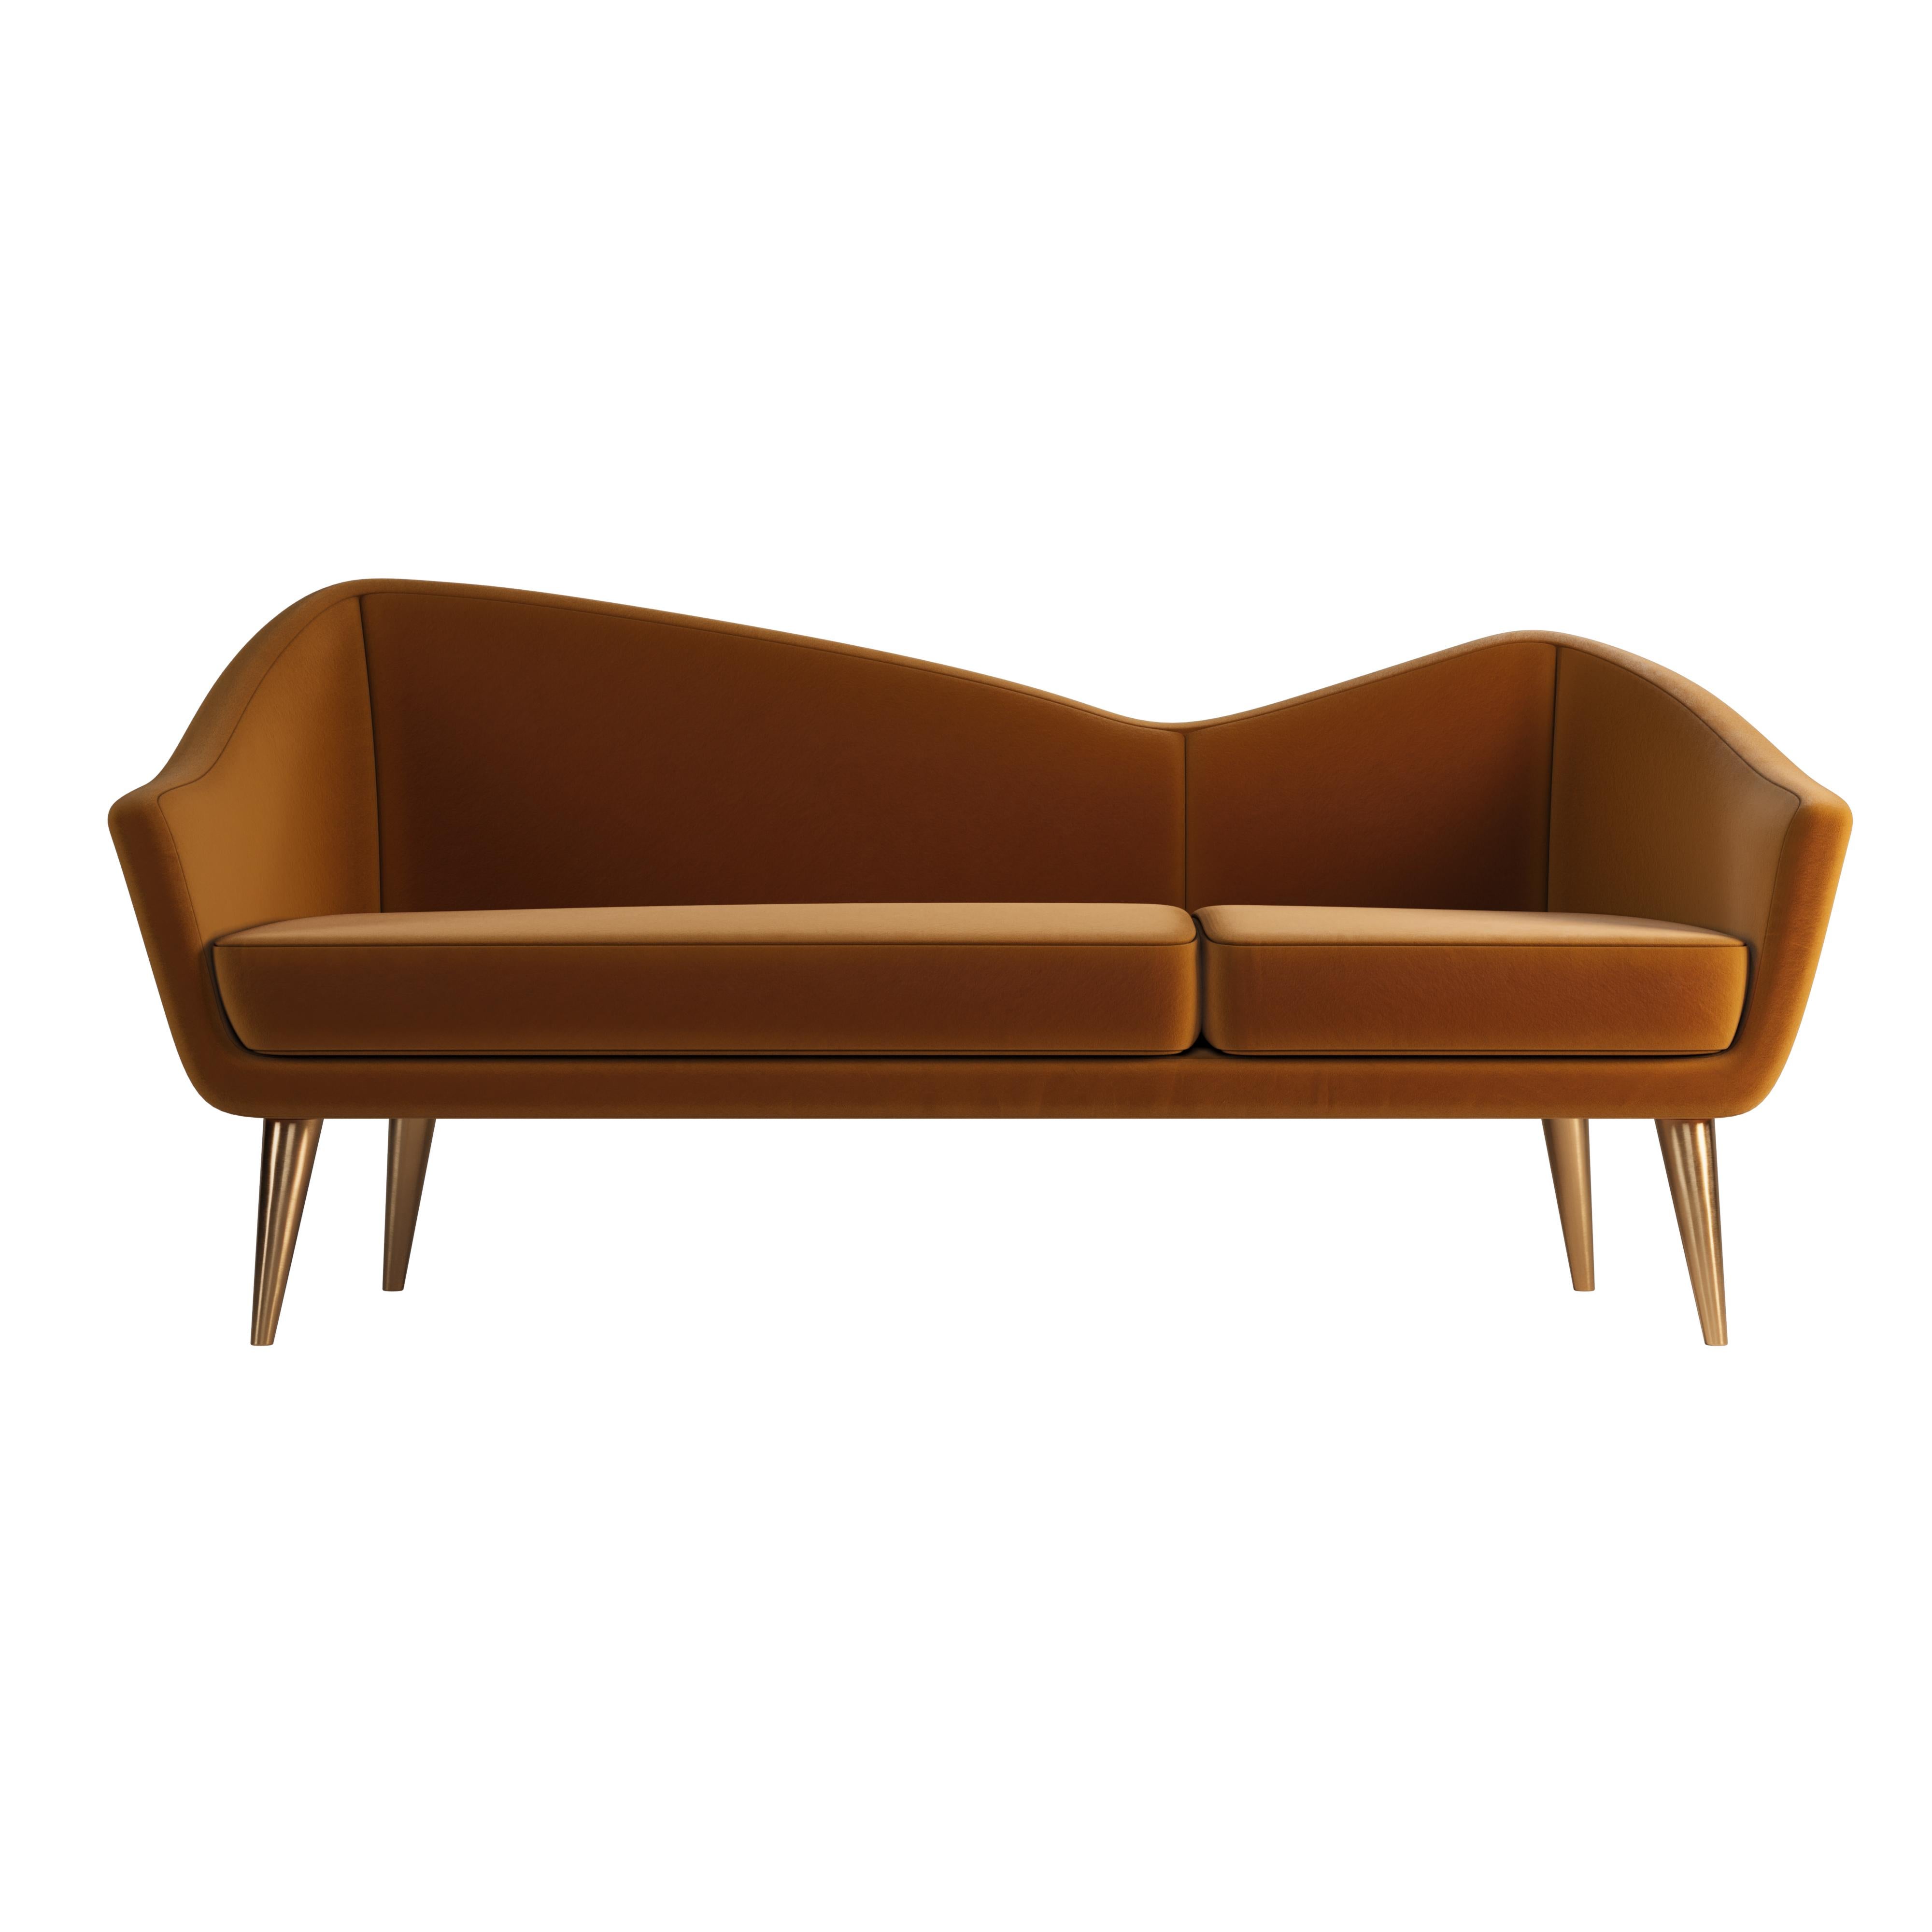 Rita Hayworth was an American actress and dancer who achieved fame during the 1940s as one of this time’s top stars, appearing in a total of 61 films over 37 years. The Hayworth Vintage Twin Seat, honoring this renowned actress, features a feminine